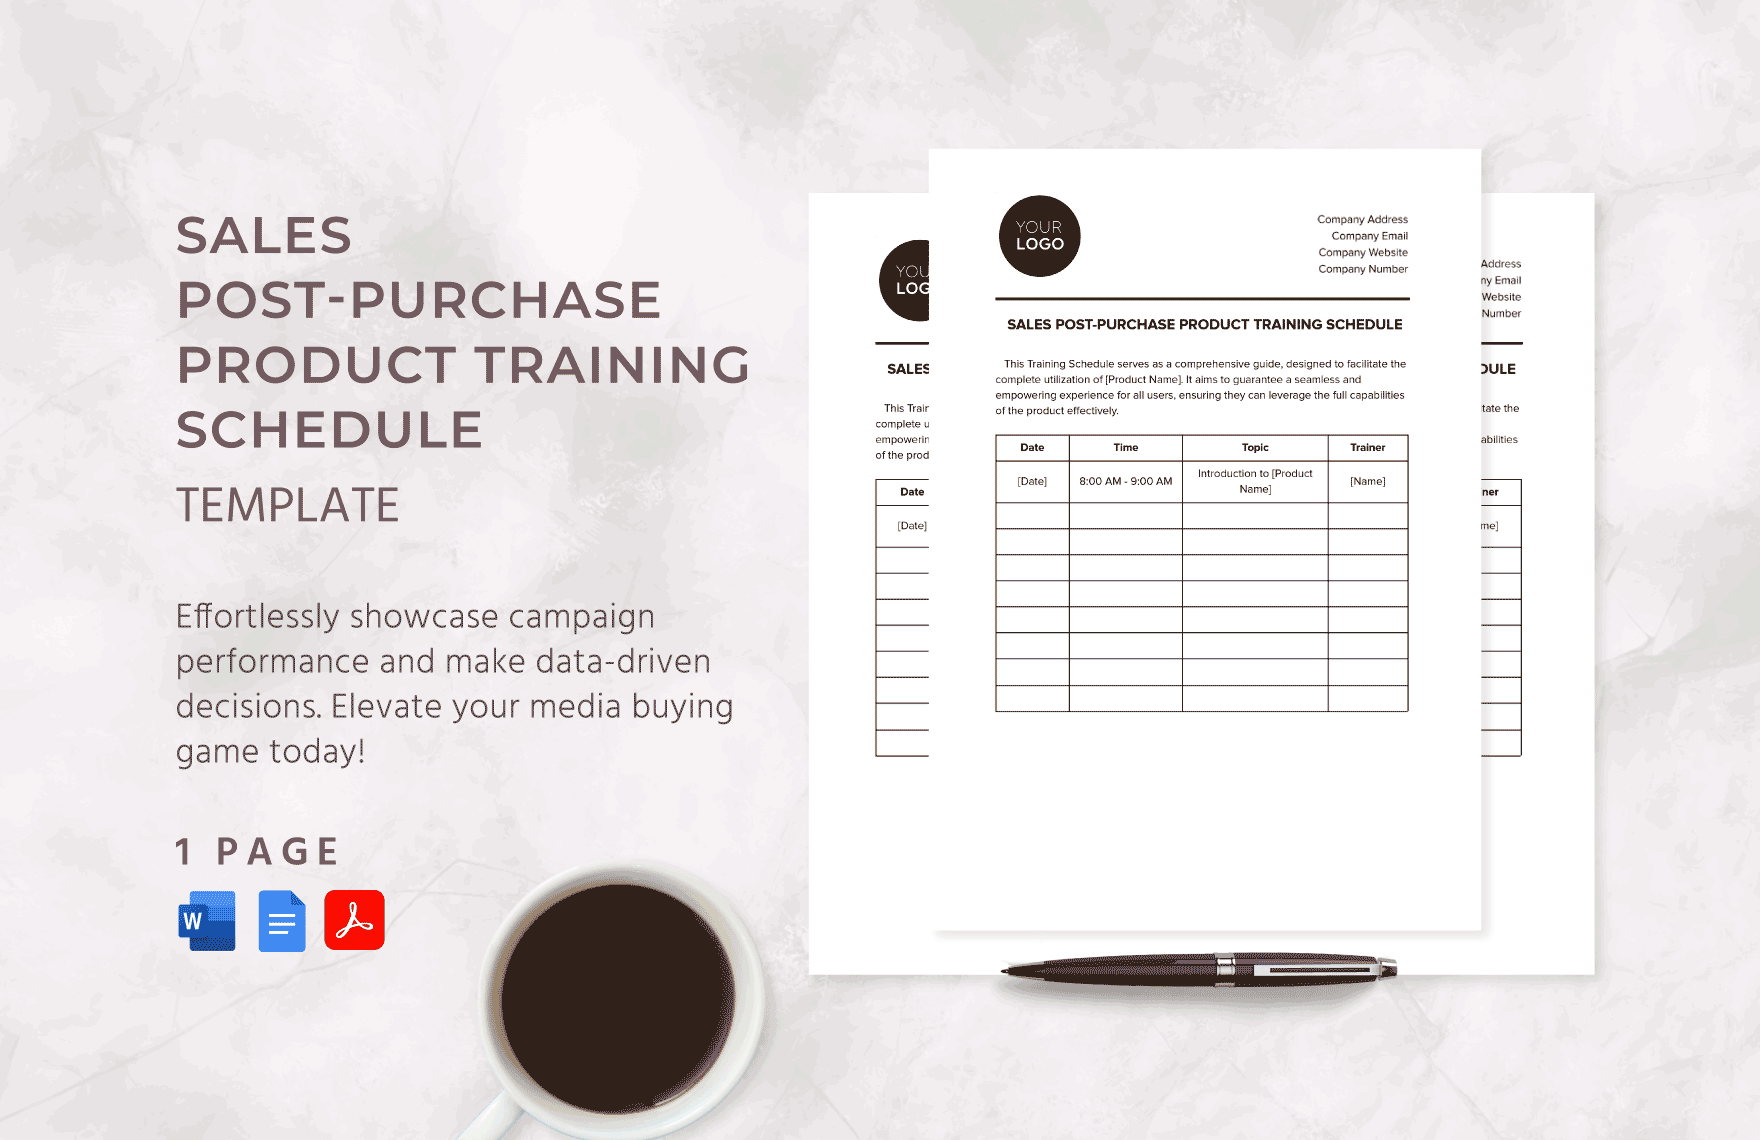 Sales Post-Purchase Product Training Schedule Template in Word, Google Docs, PDF